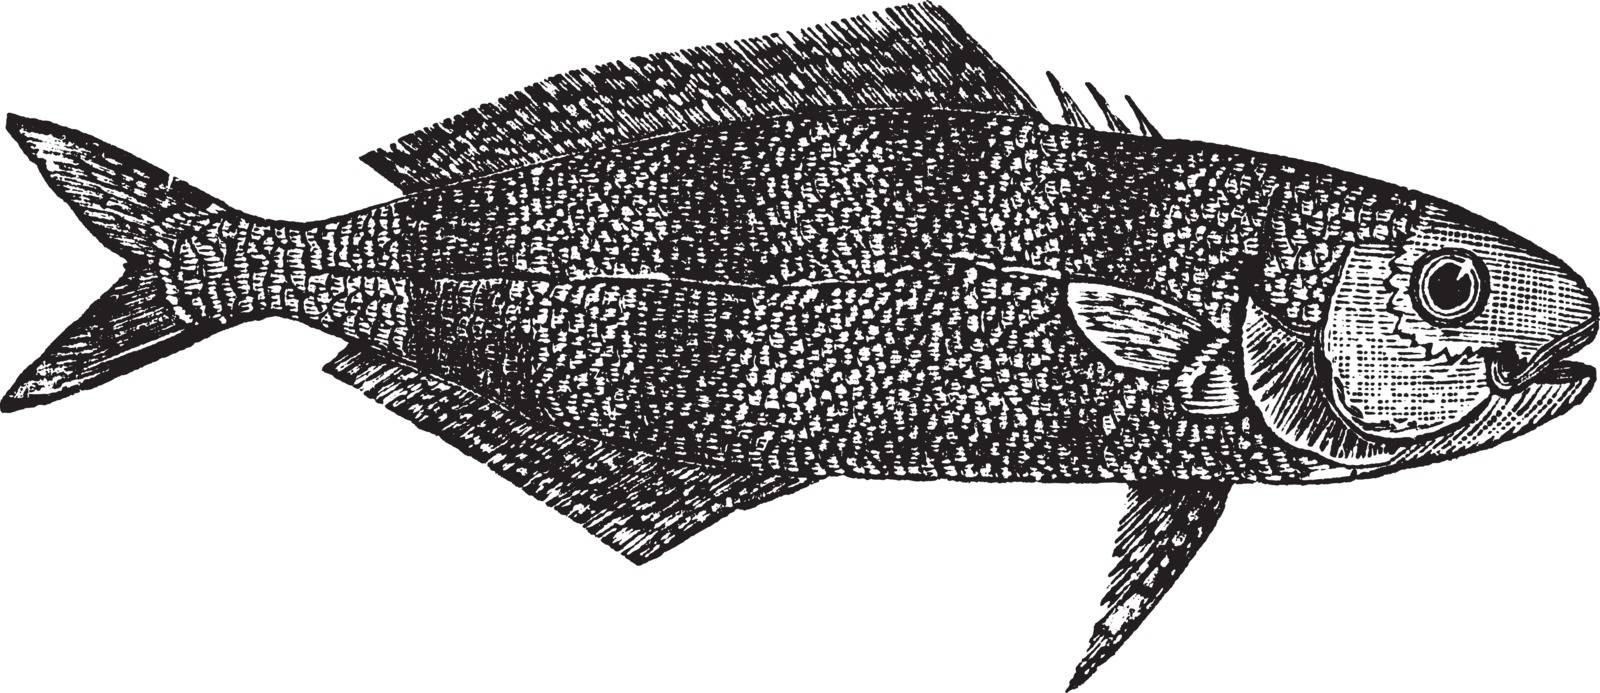 Naucrates Ductor or Pilot fish vintage engraving. Old engraved illustration of Naucrates ductor.